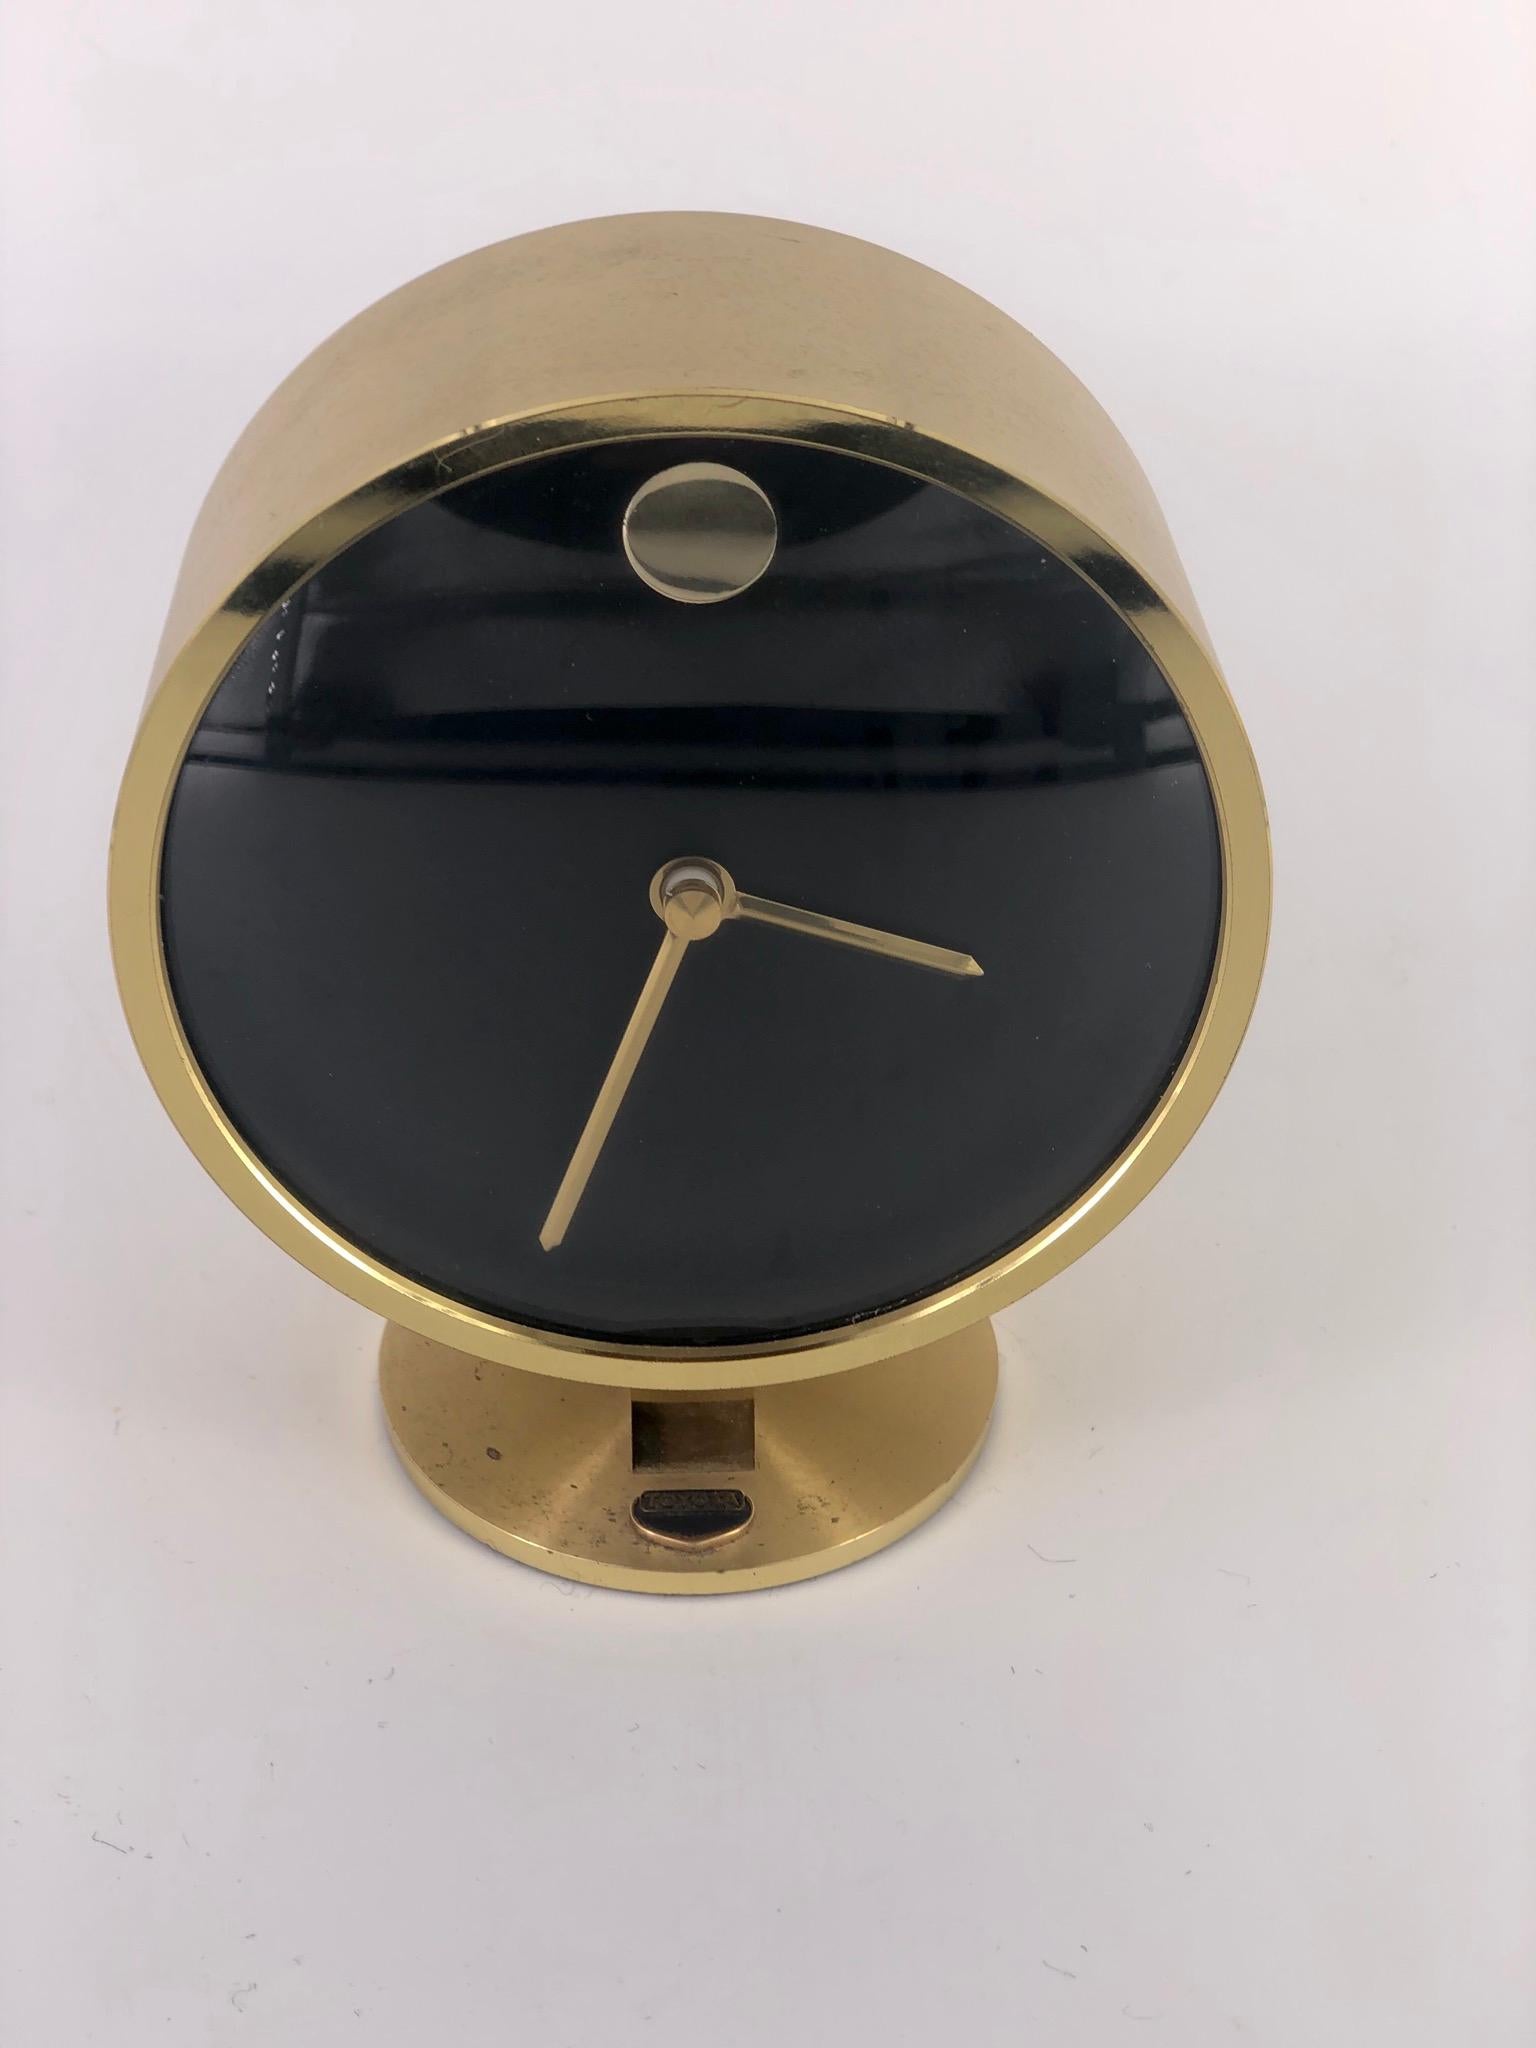 Polished brass table clock design by Howard Miller, circa 1980s, comes with small plaque it was awarded to a Toyota dealership, battery operated German movement.